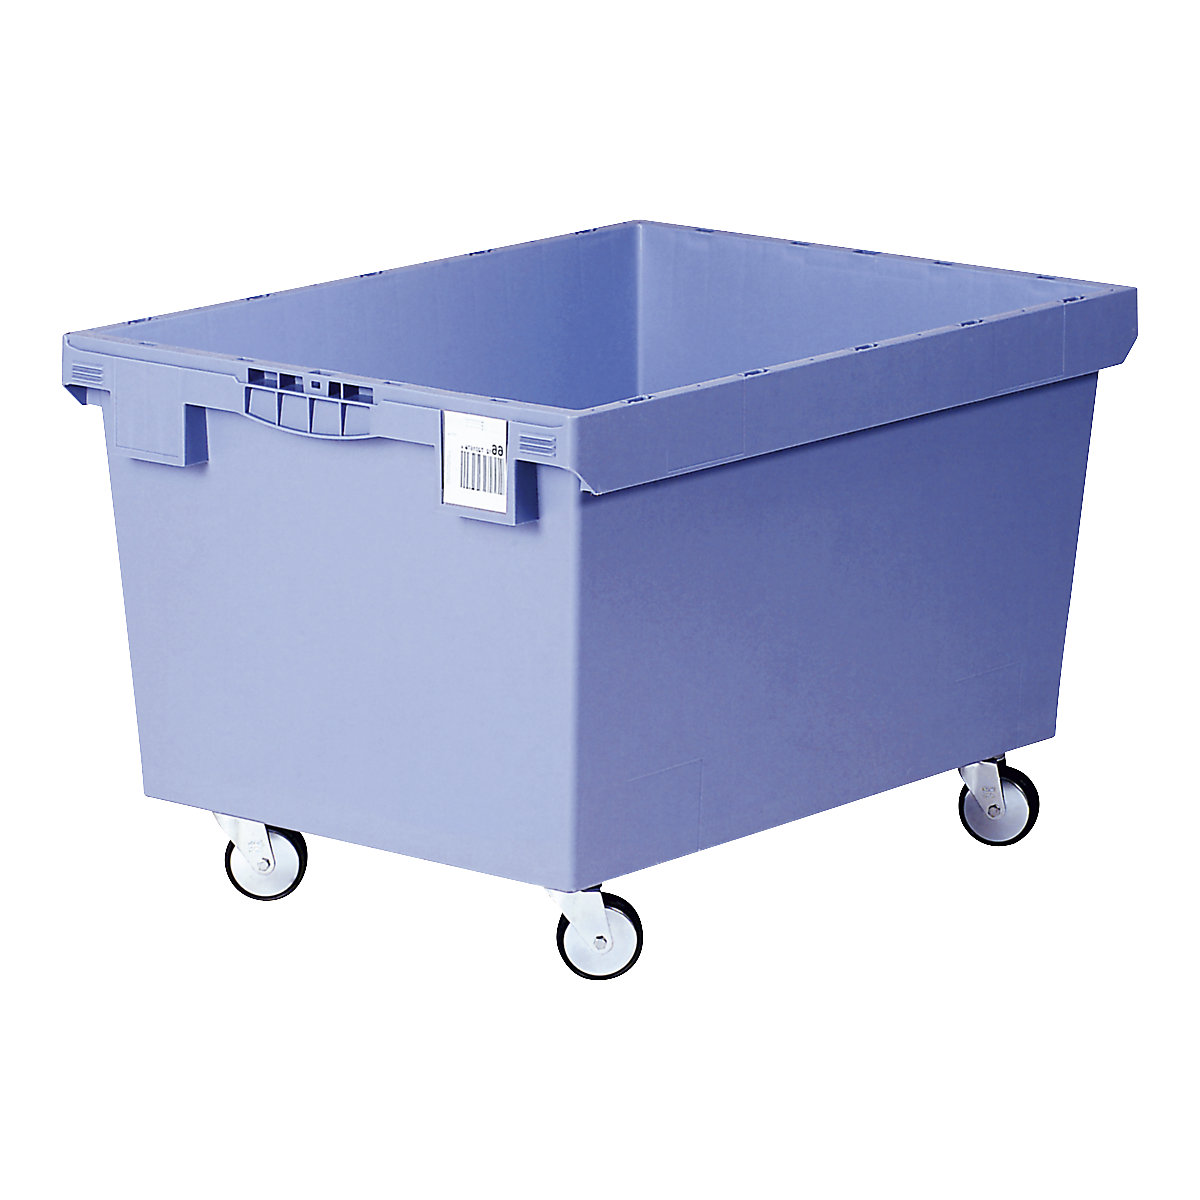 Reusable container with castors – BITO